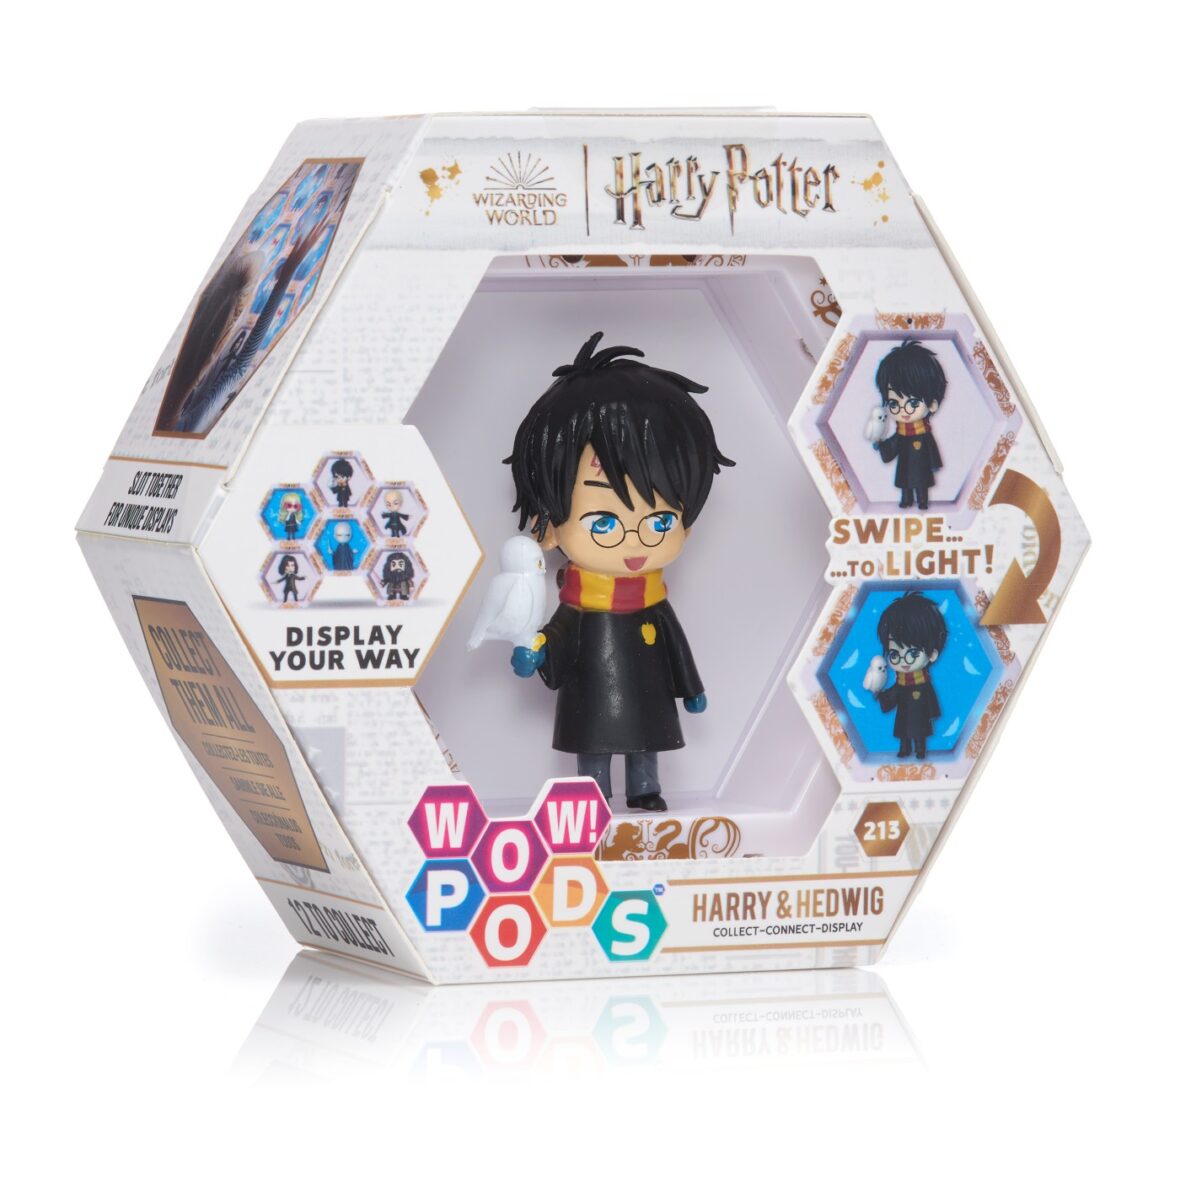 Wow! Pods – Wizarding World Harry Si Hedwig